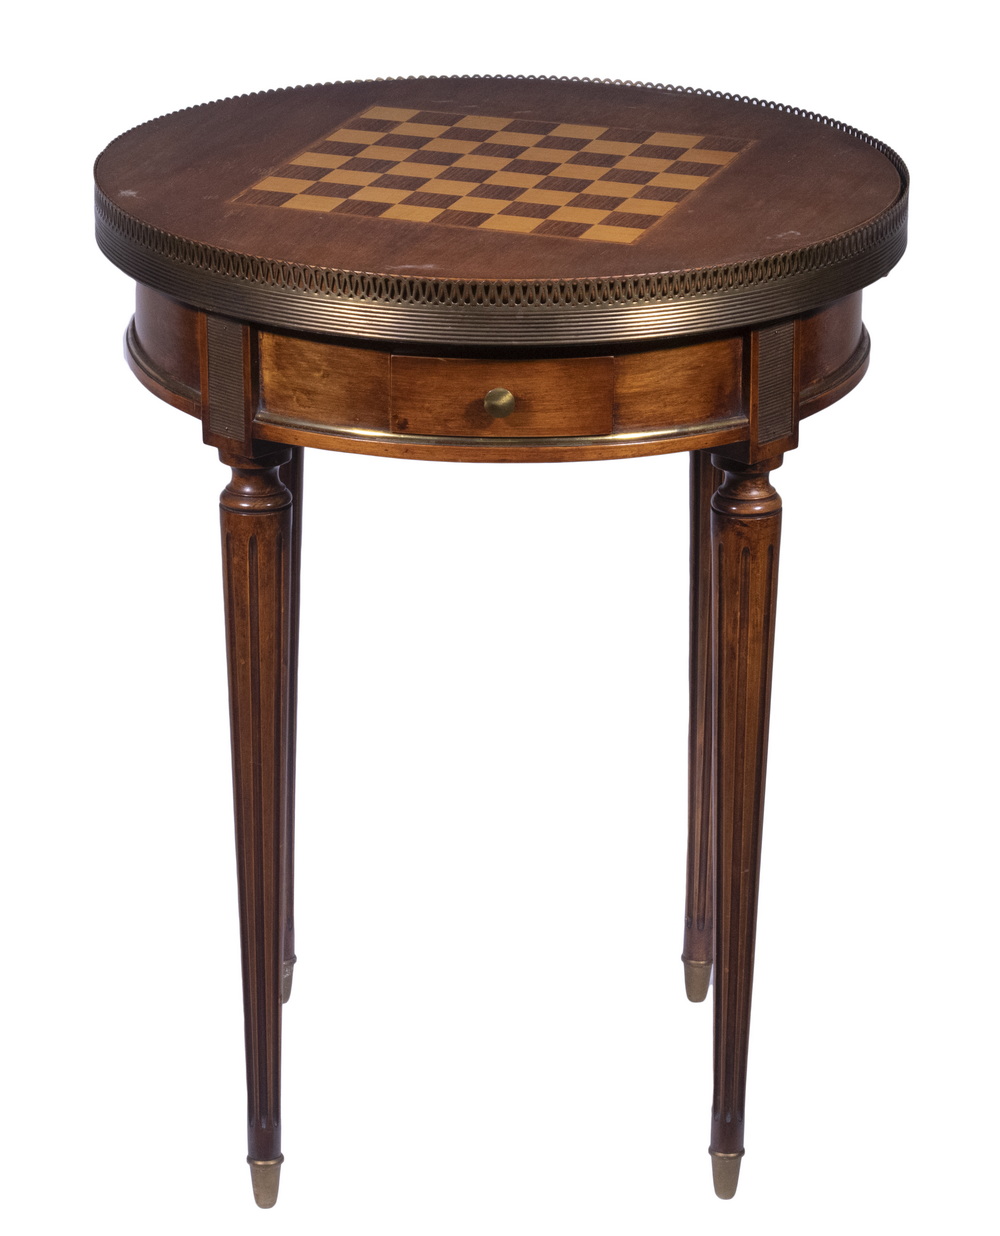 ROUND MARQUETRY CHESS GAME TABLE 2b16e4